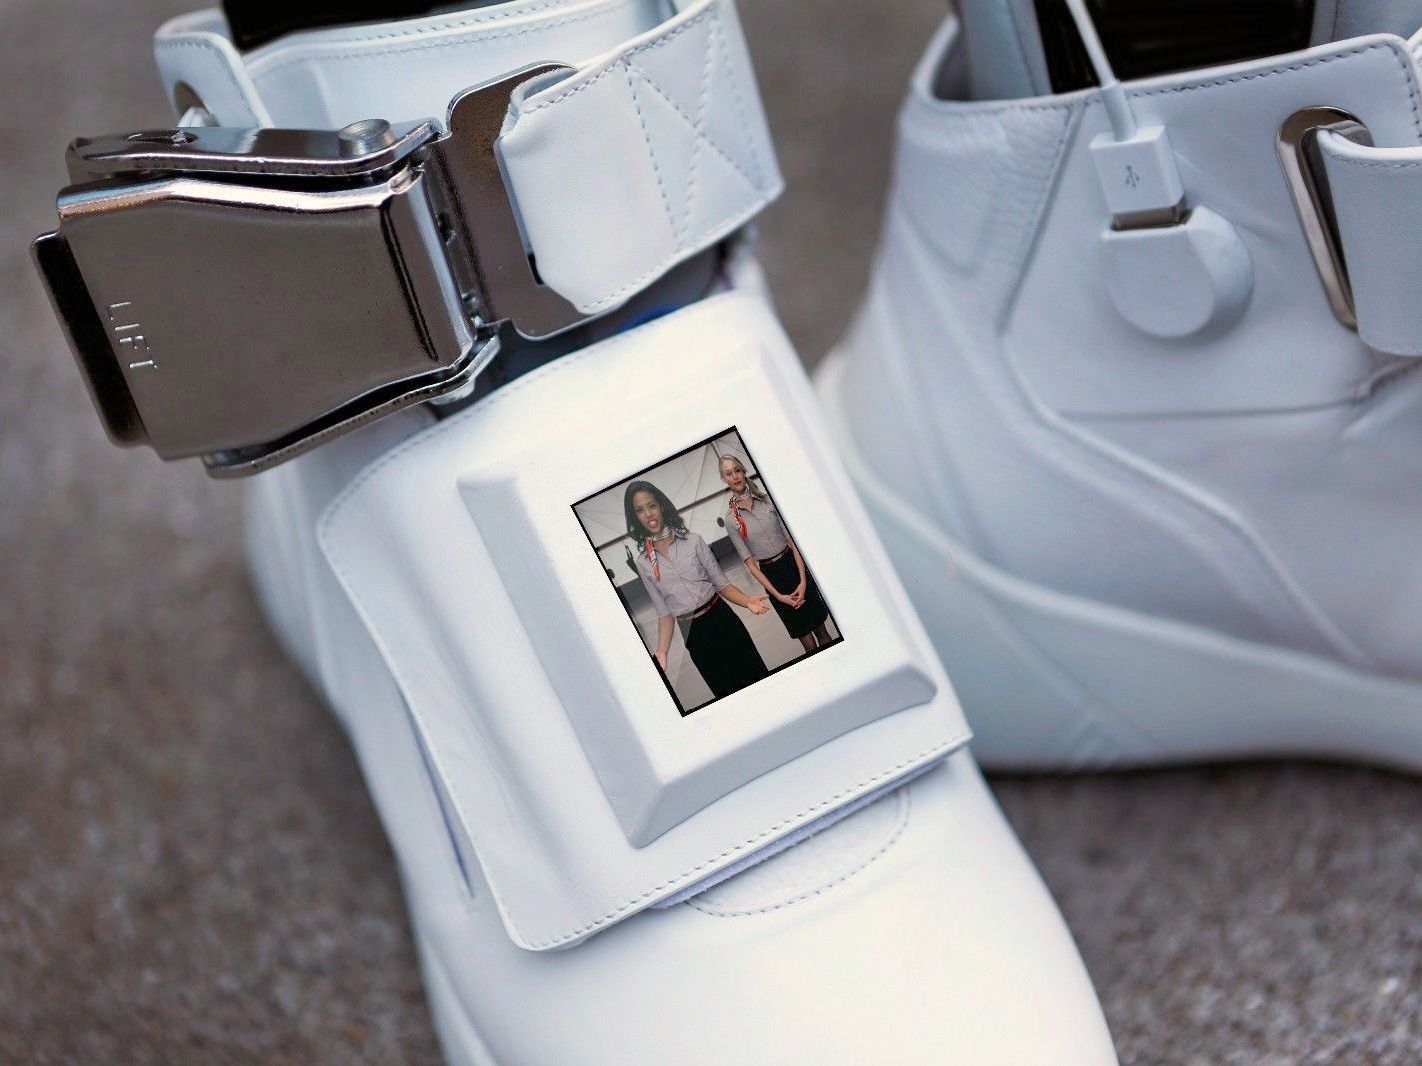 Virgin America Created Sneakers That Recreate The Experience Of Flying First Class